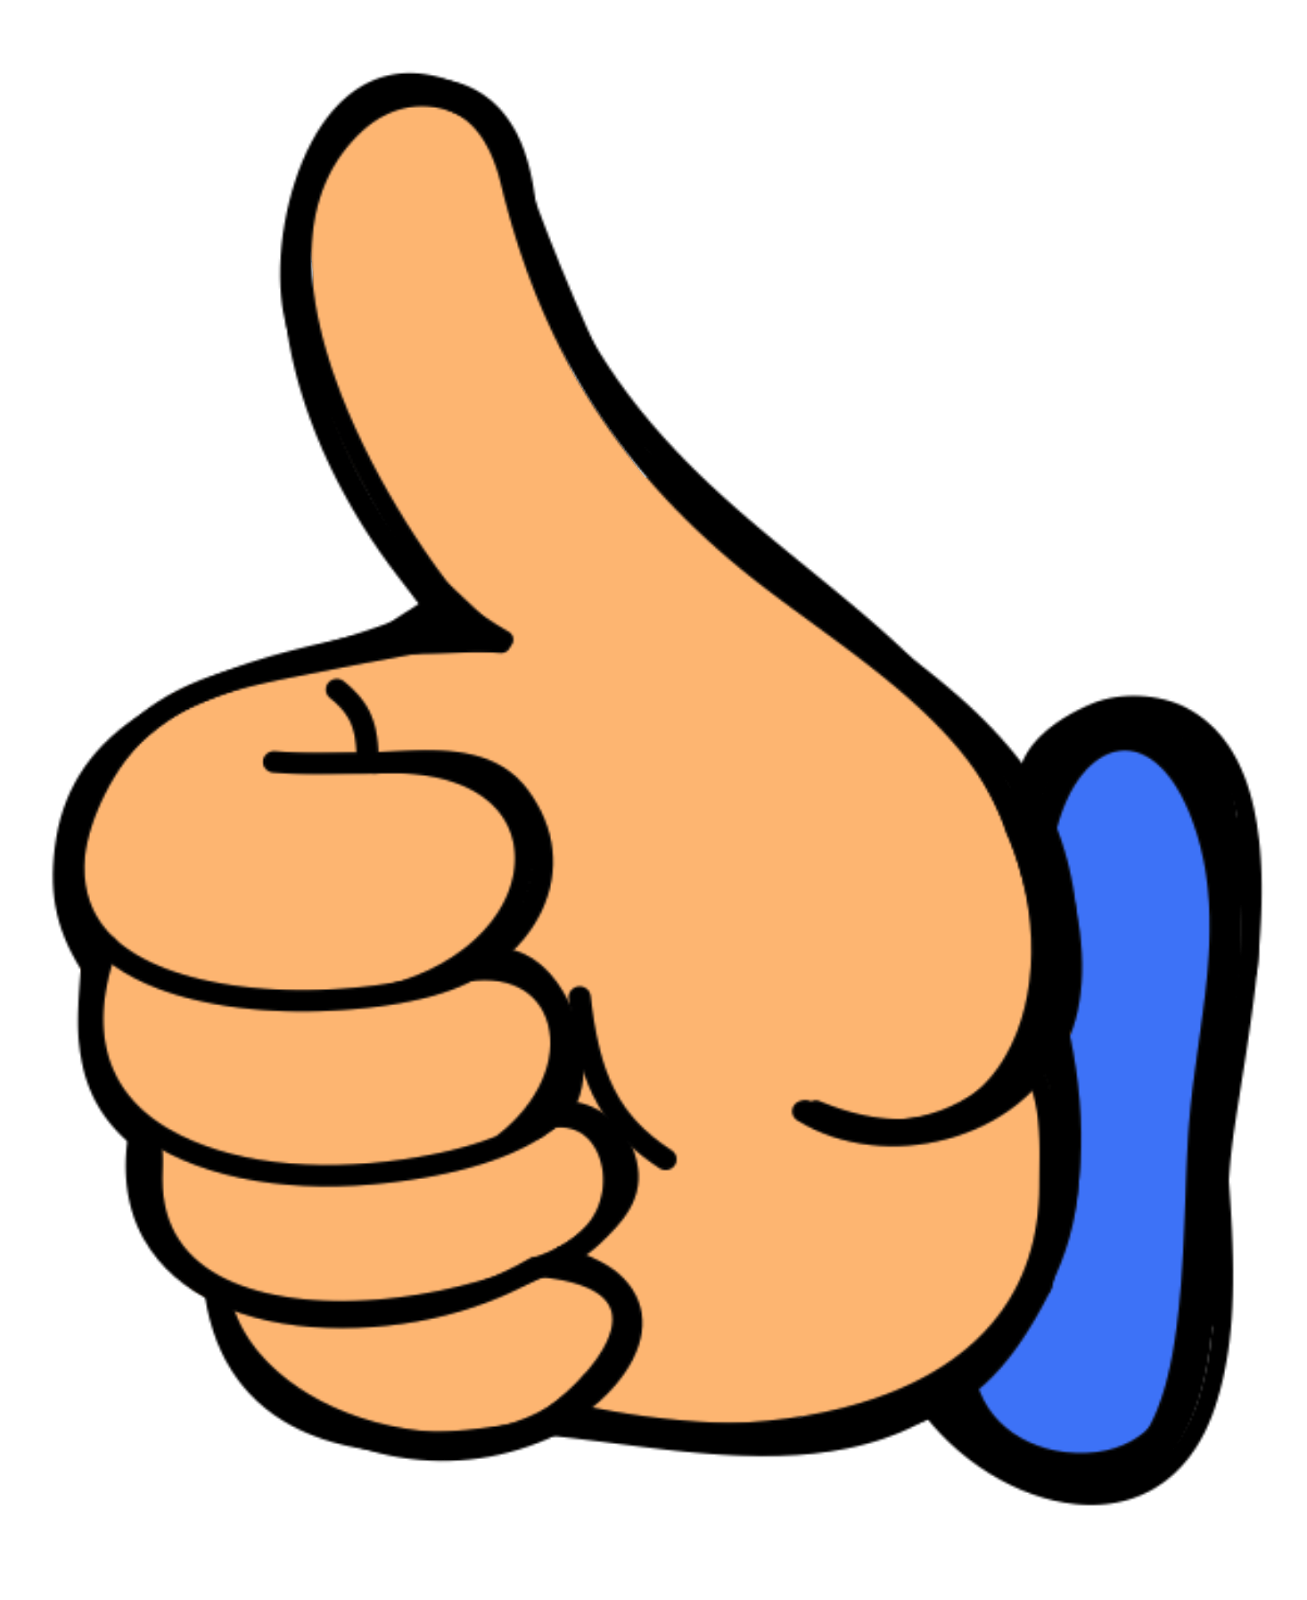 Thumbs up clipart free